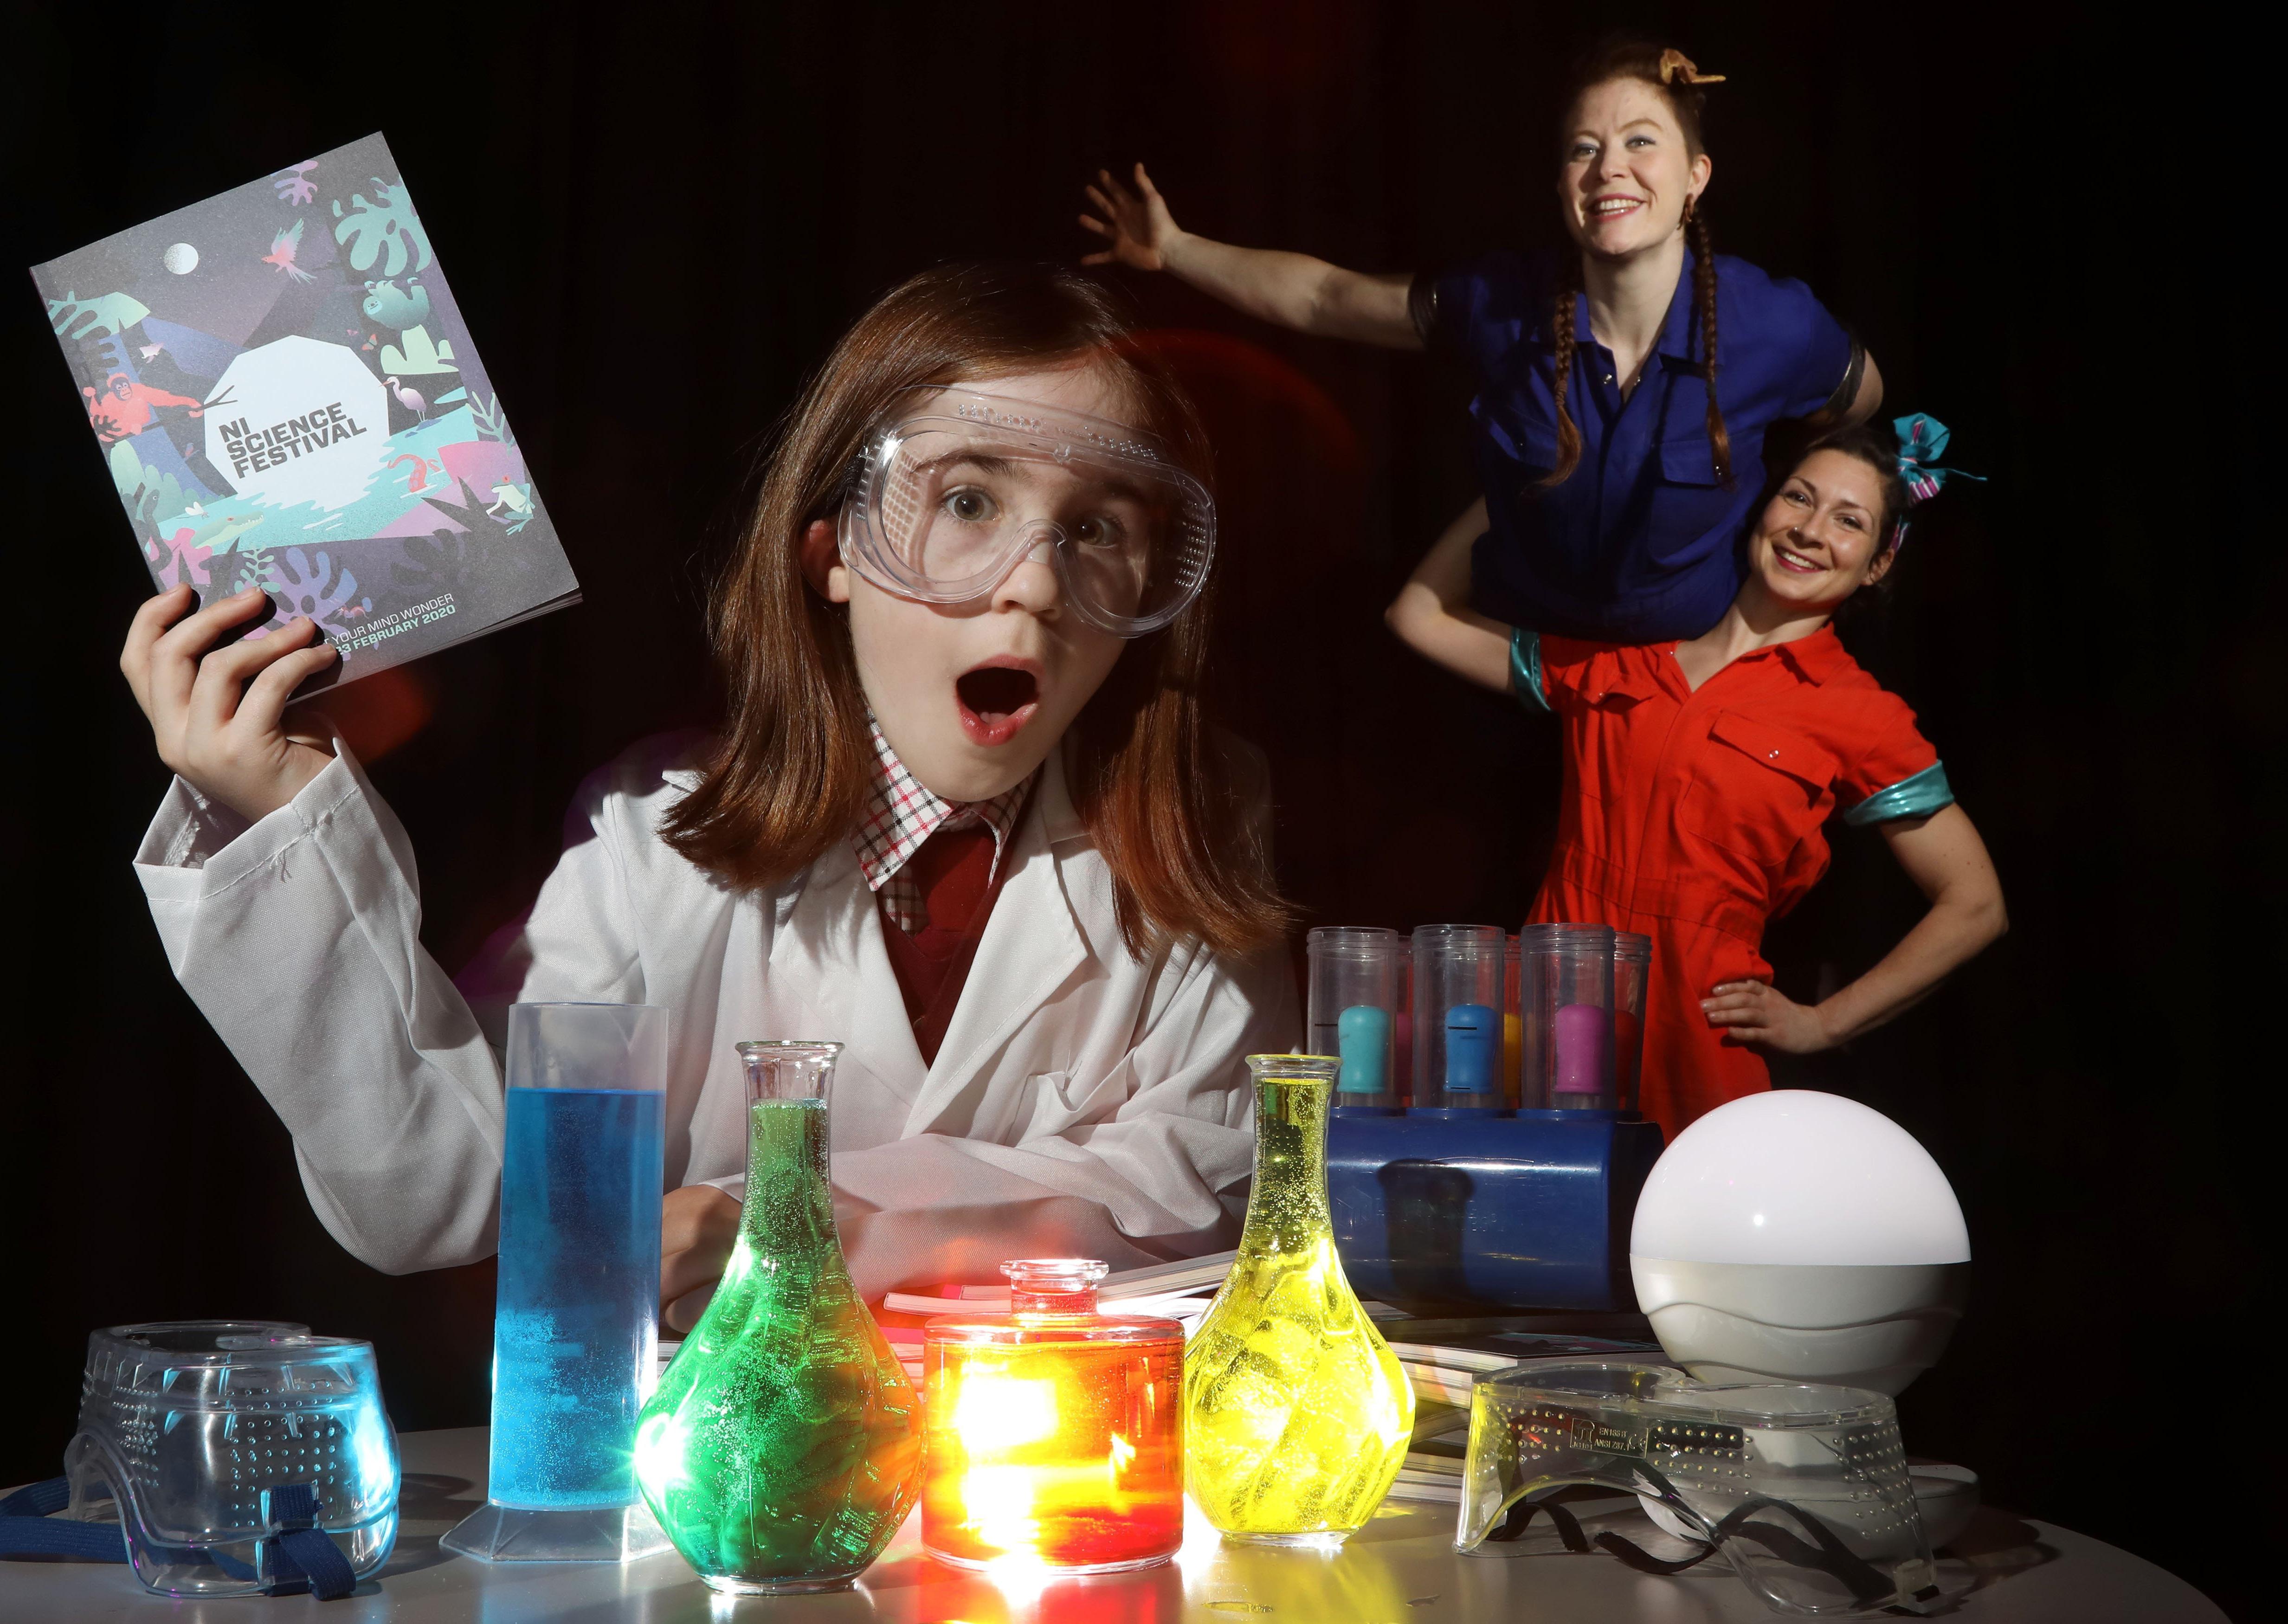 NI Science Festival, various venues, February 13-23
The NI Science Festival has unveiled its sixth annual programme of 270 events across 90 venues throughout Northern Ireland. The festival is packed with workshops, talks and forums for people of all ages. Find out more at www.nisciencefestival.com.